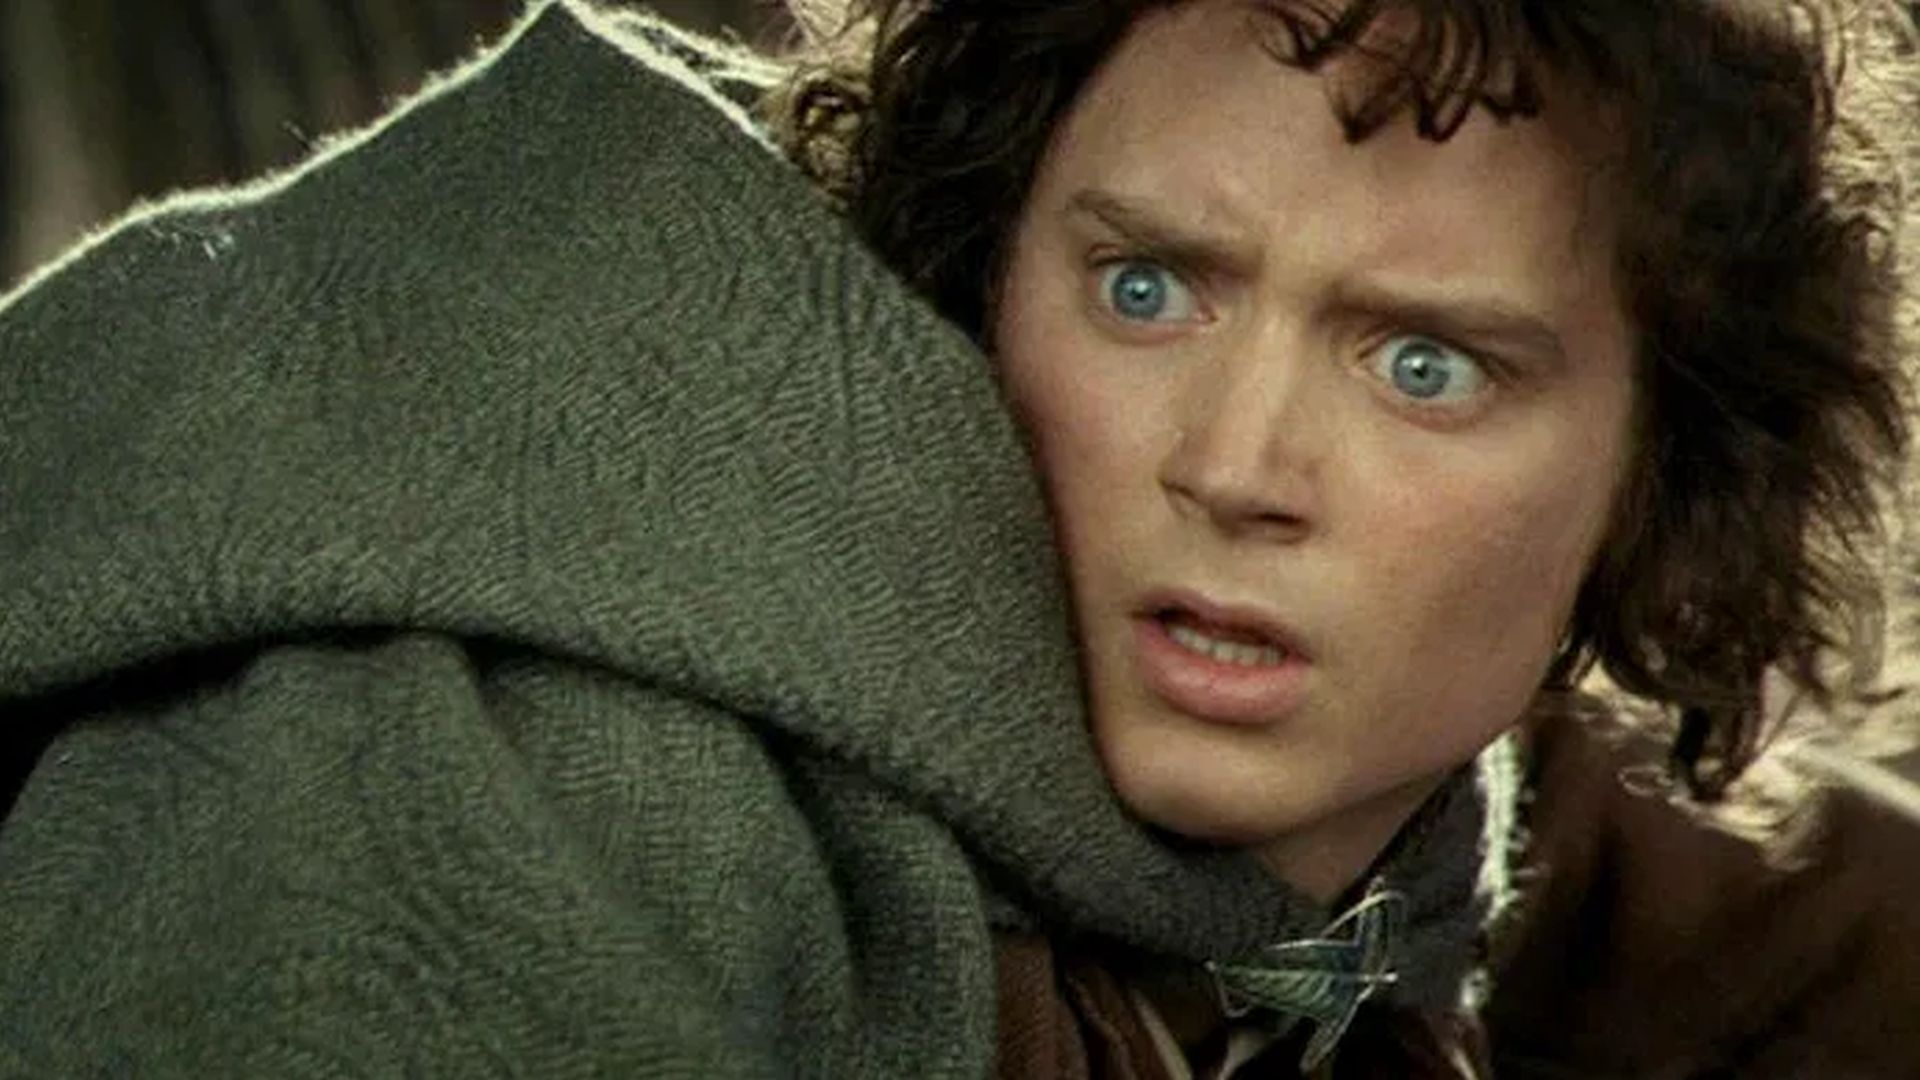 Here’s why EA’s Lord of the Rings games start with The Two Towers and not Fellowship of the Ring